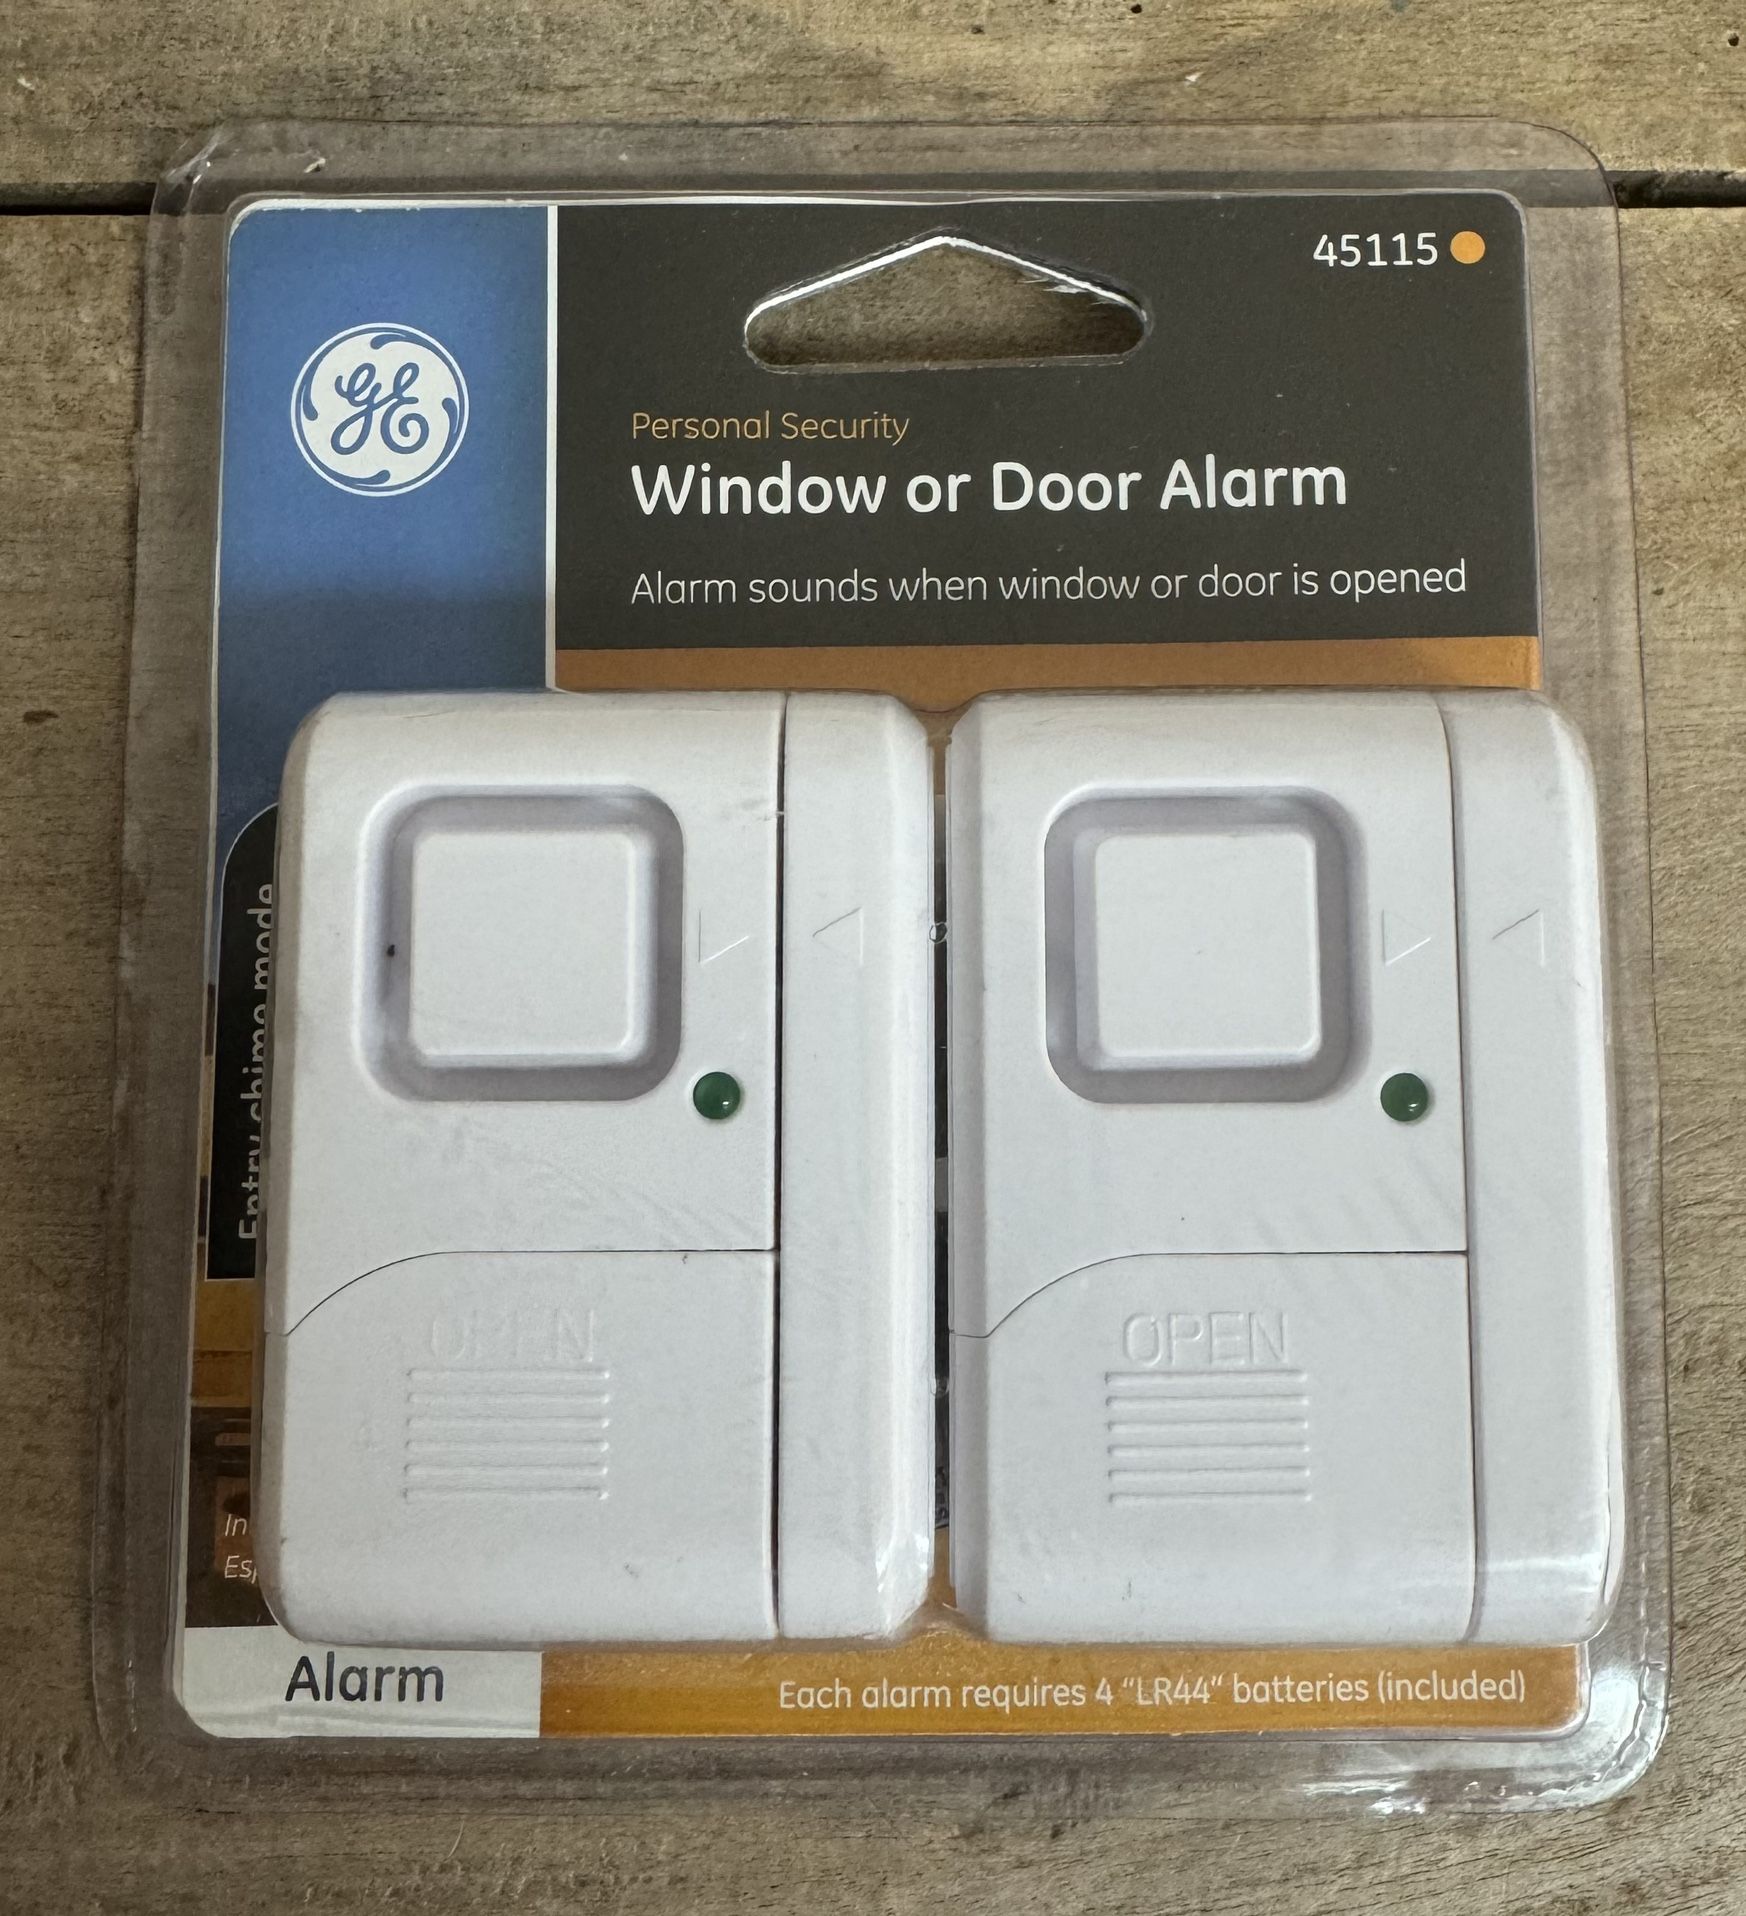 NEW and SEALED Window or Door Alarms just $5 xox